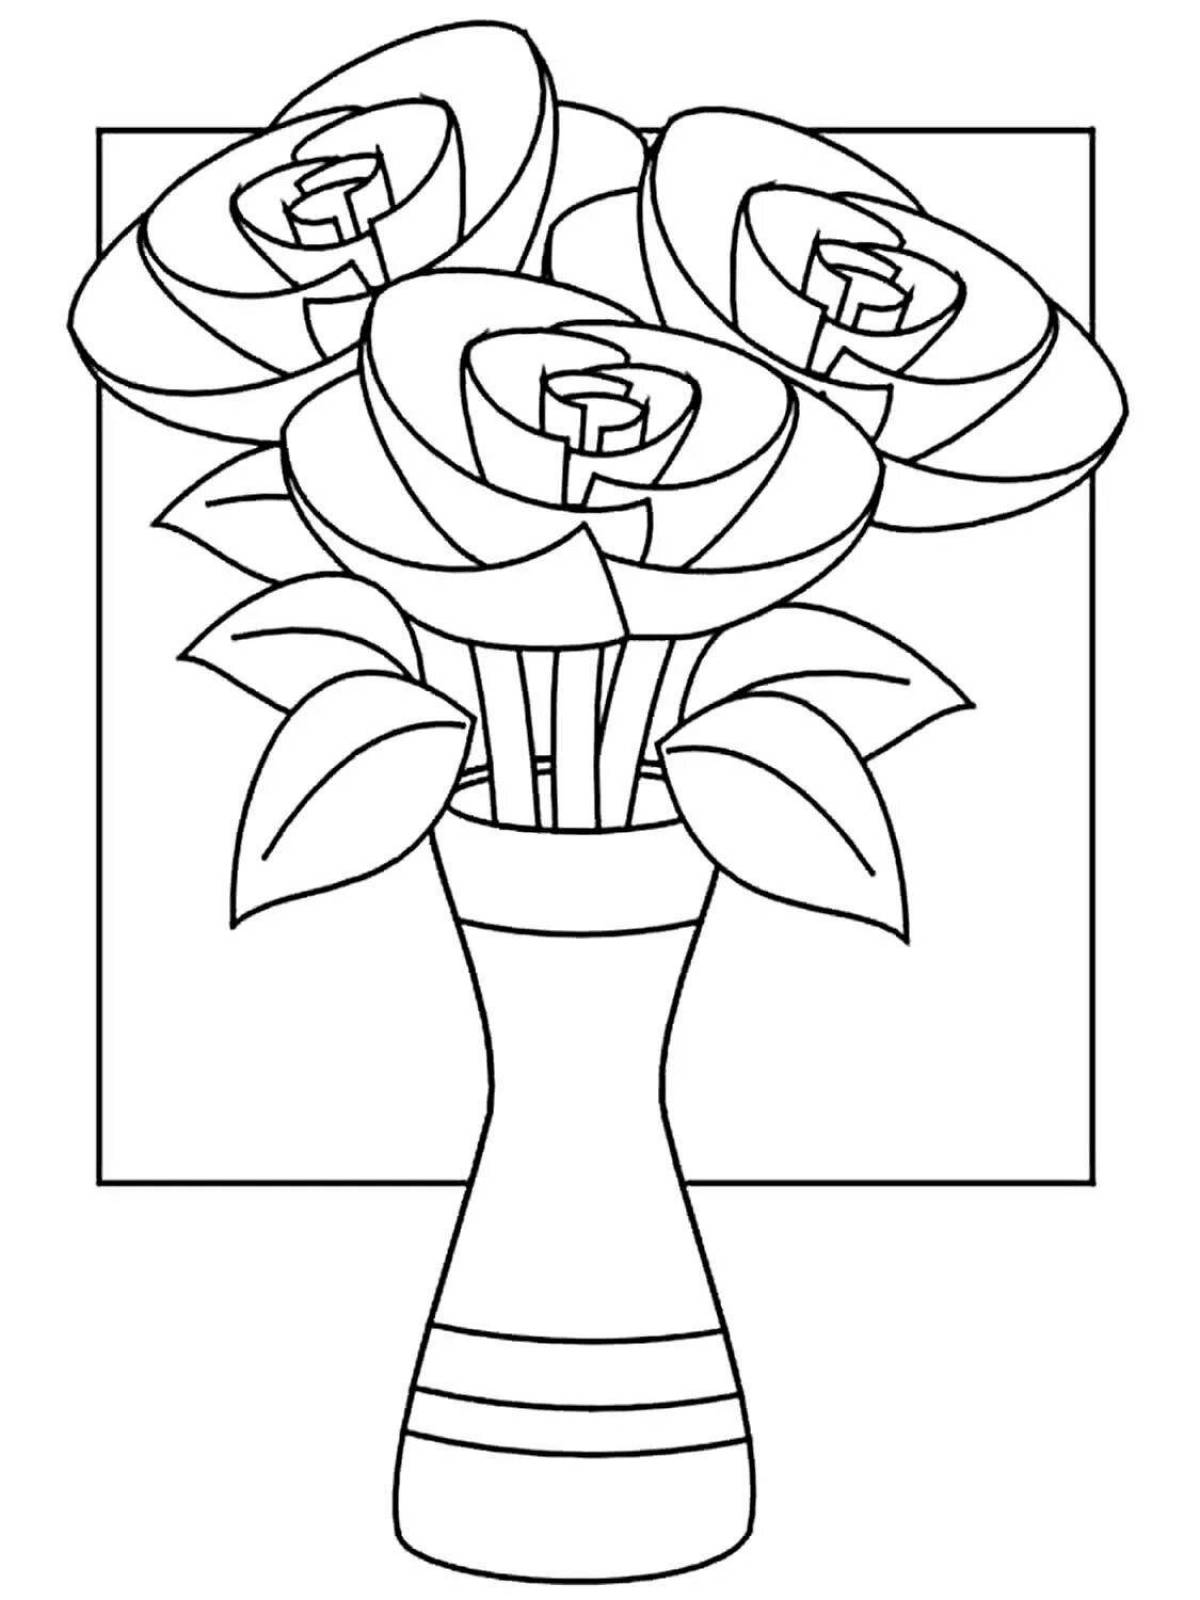 Amazing vase of flowers coloring book